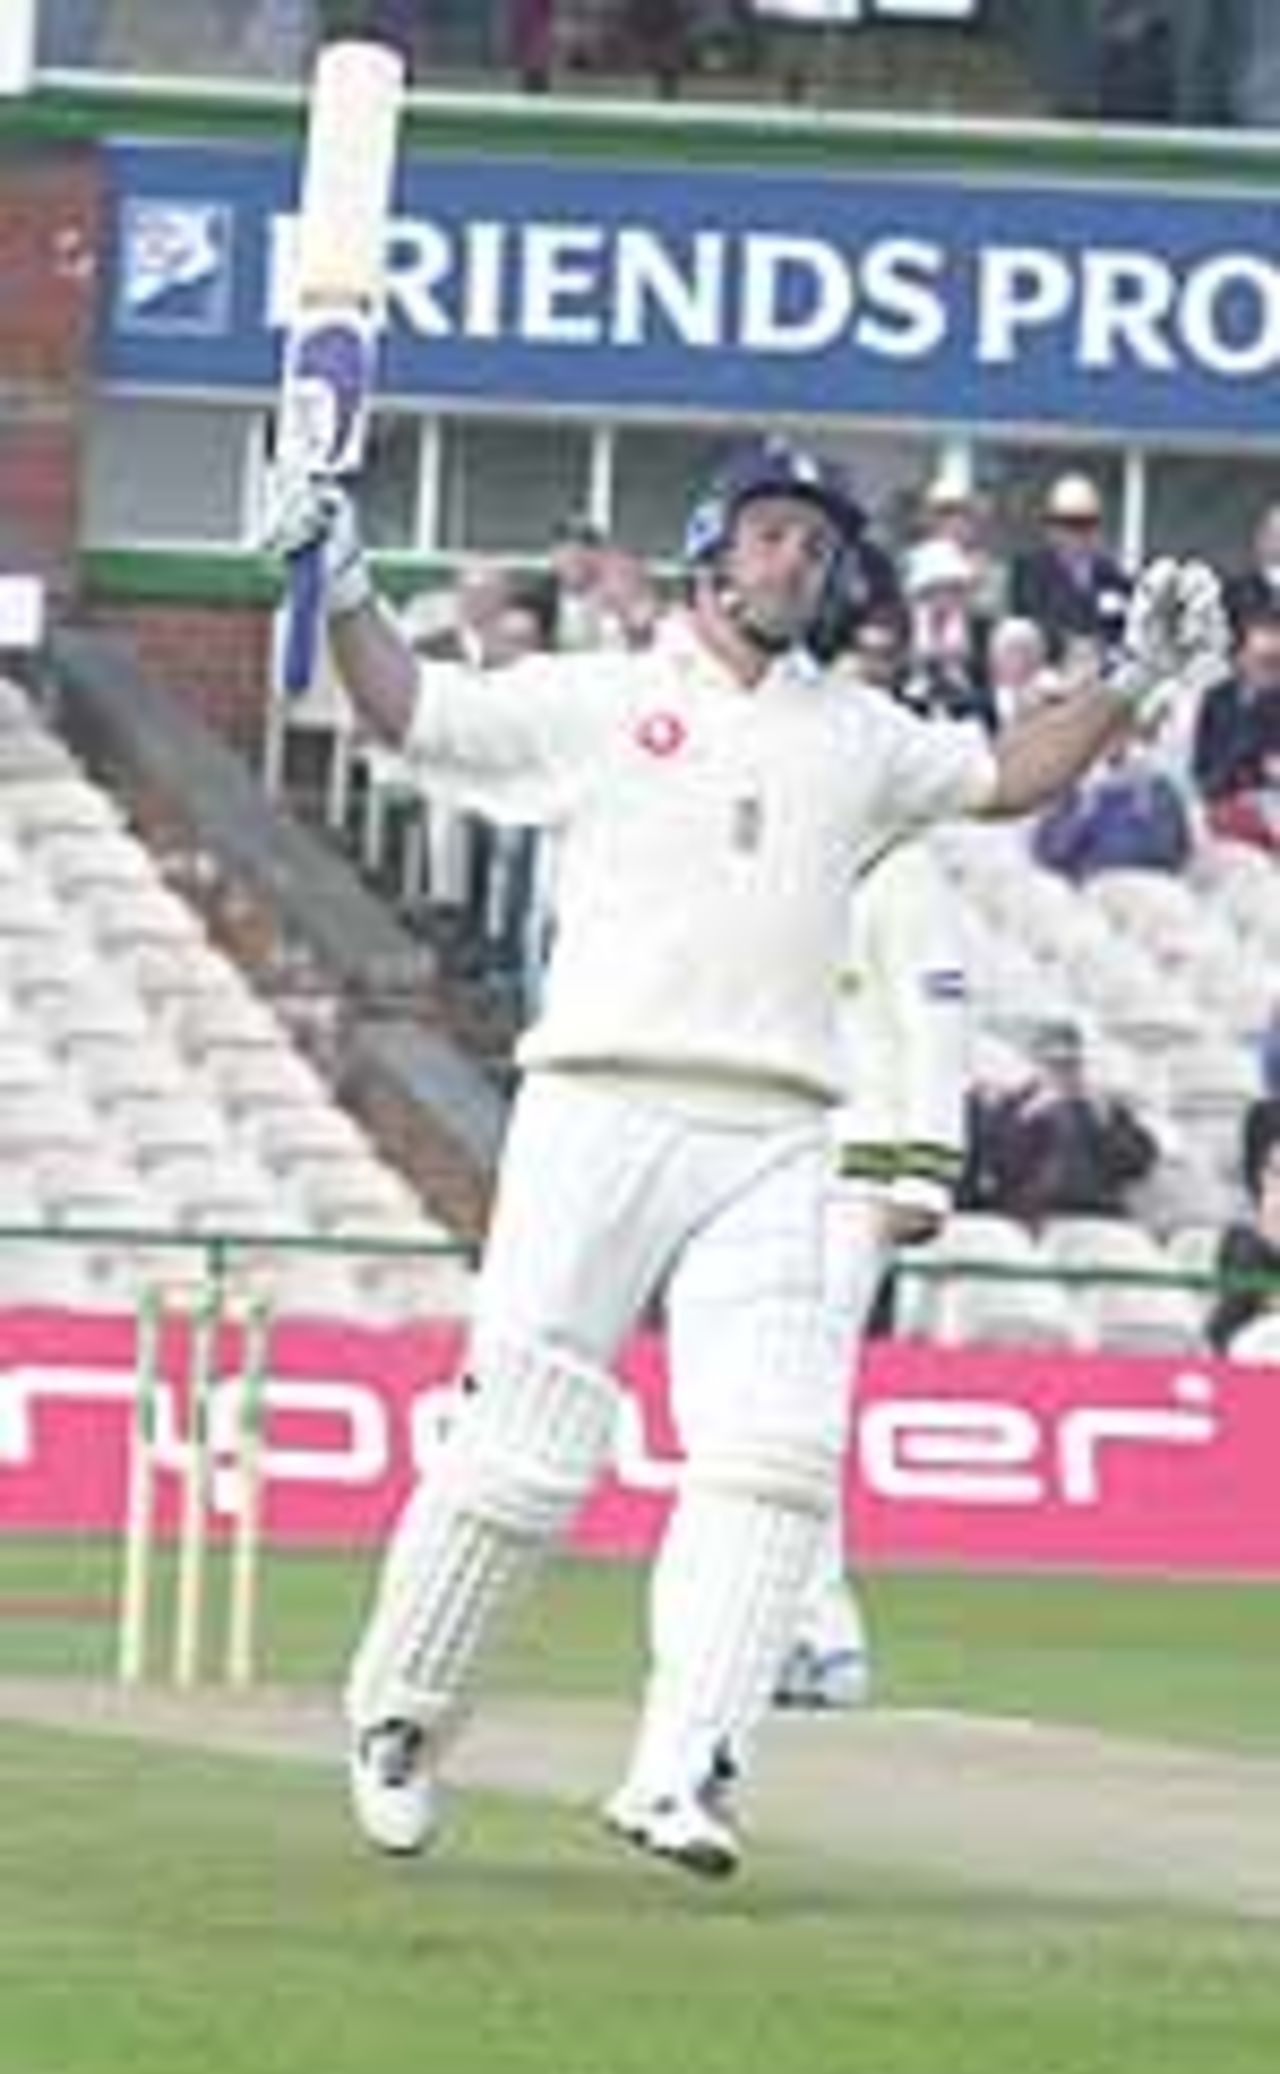 Thorpe celebrates his century, 3rd day, 2nd Test, England v Pakistan at Old Trafford